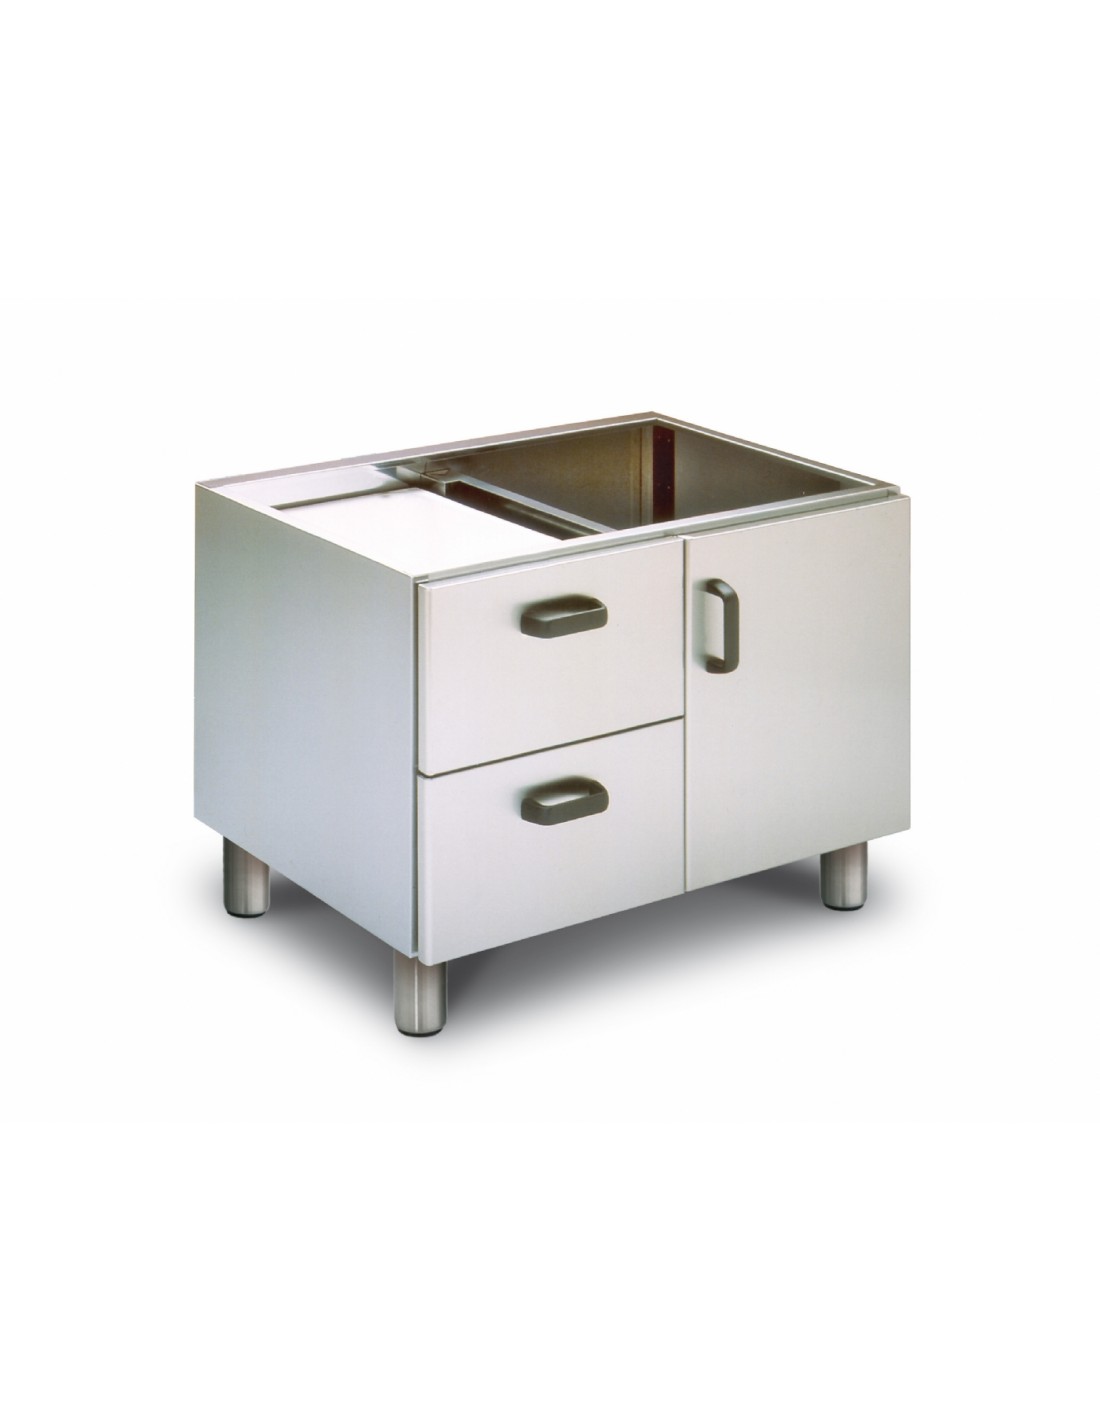 Base with drawers and door - N. 2 drawers with n. 2 plastic boxes GN 1/1 - Dimensions cm 80 x 56,5 x 58 h